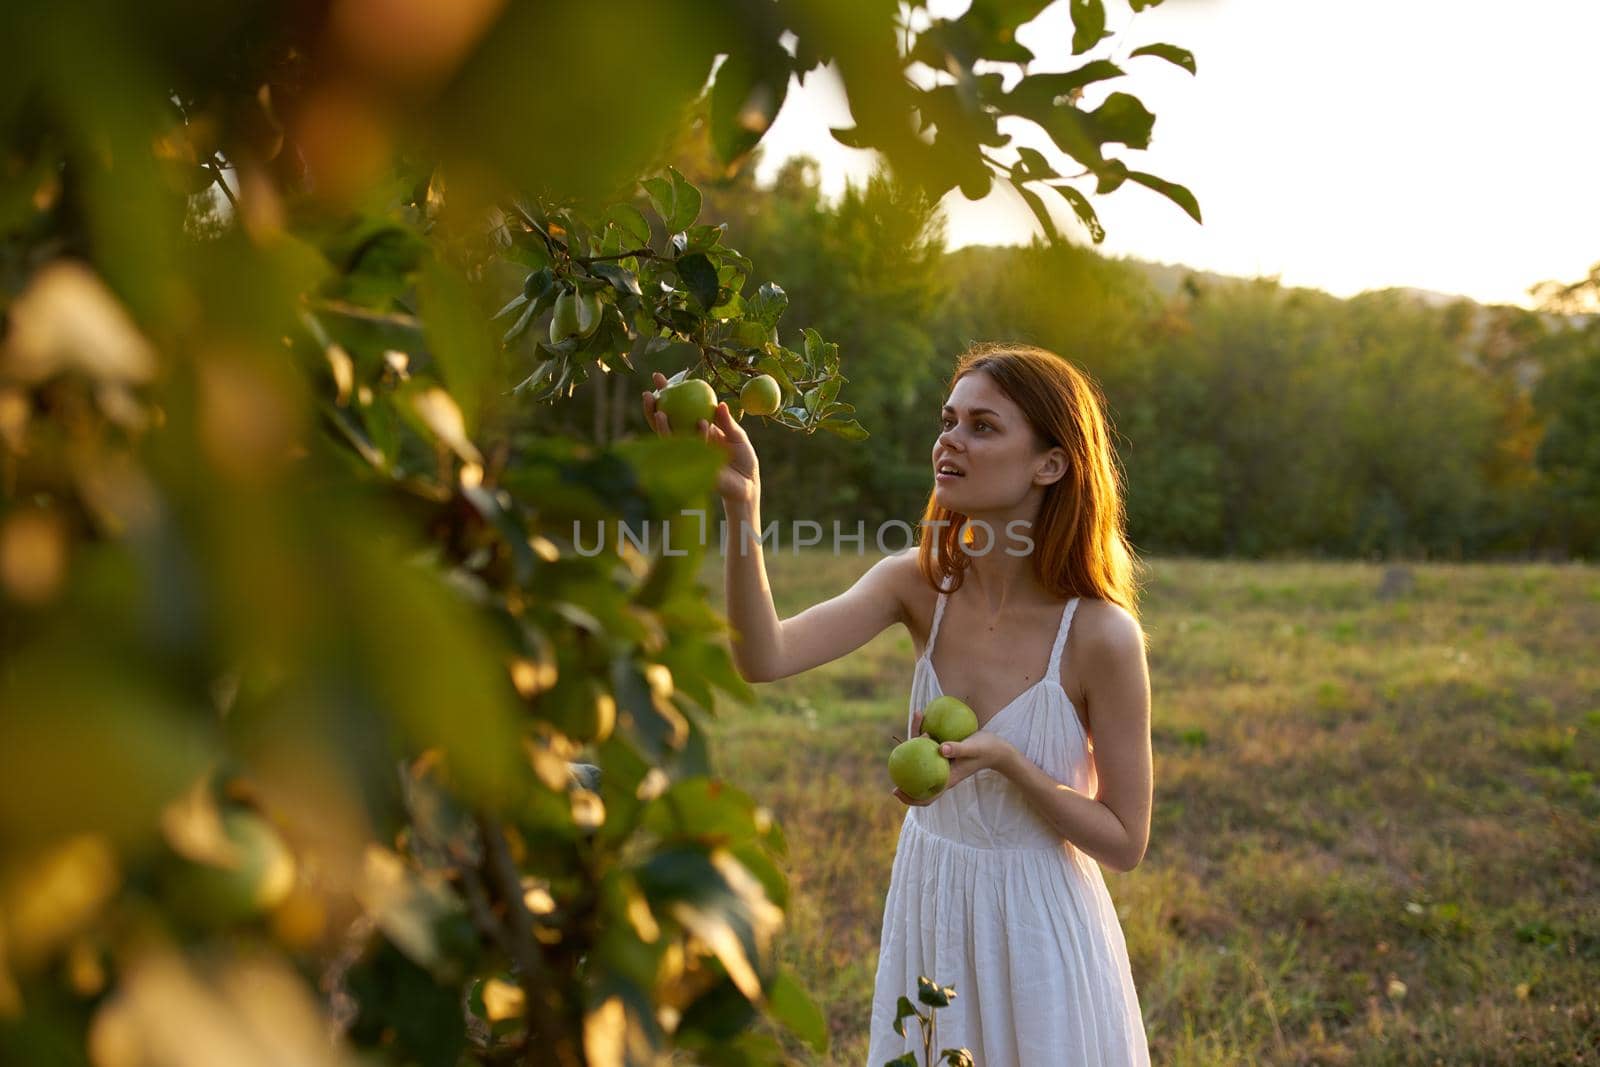 pretty woman in white dress picking apples from a tree in a field. High quality photo